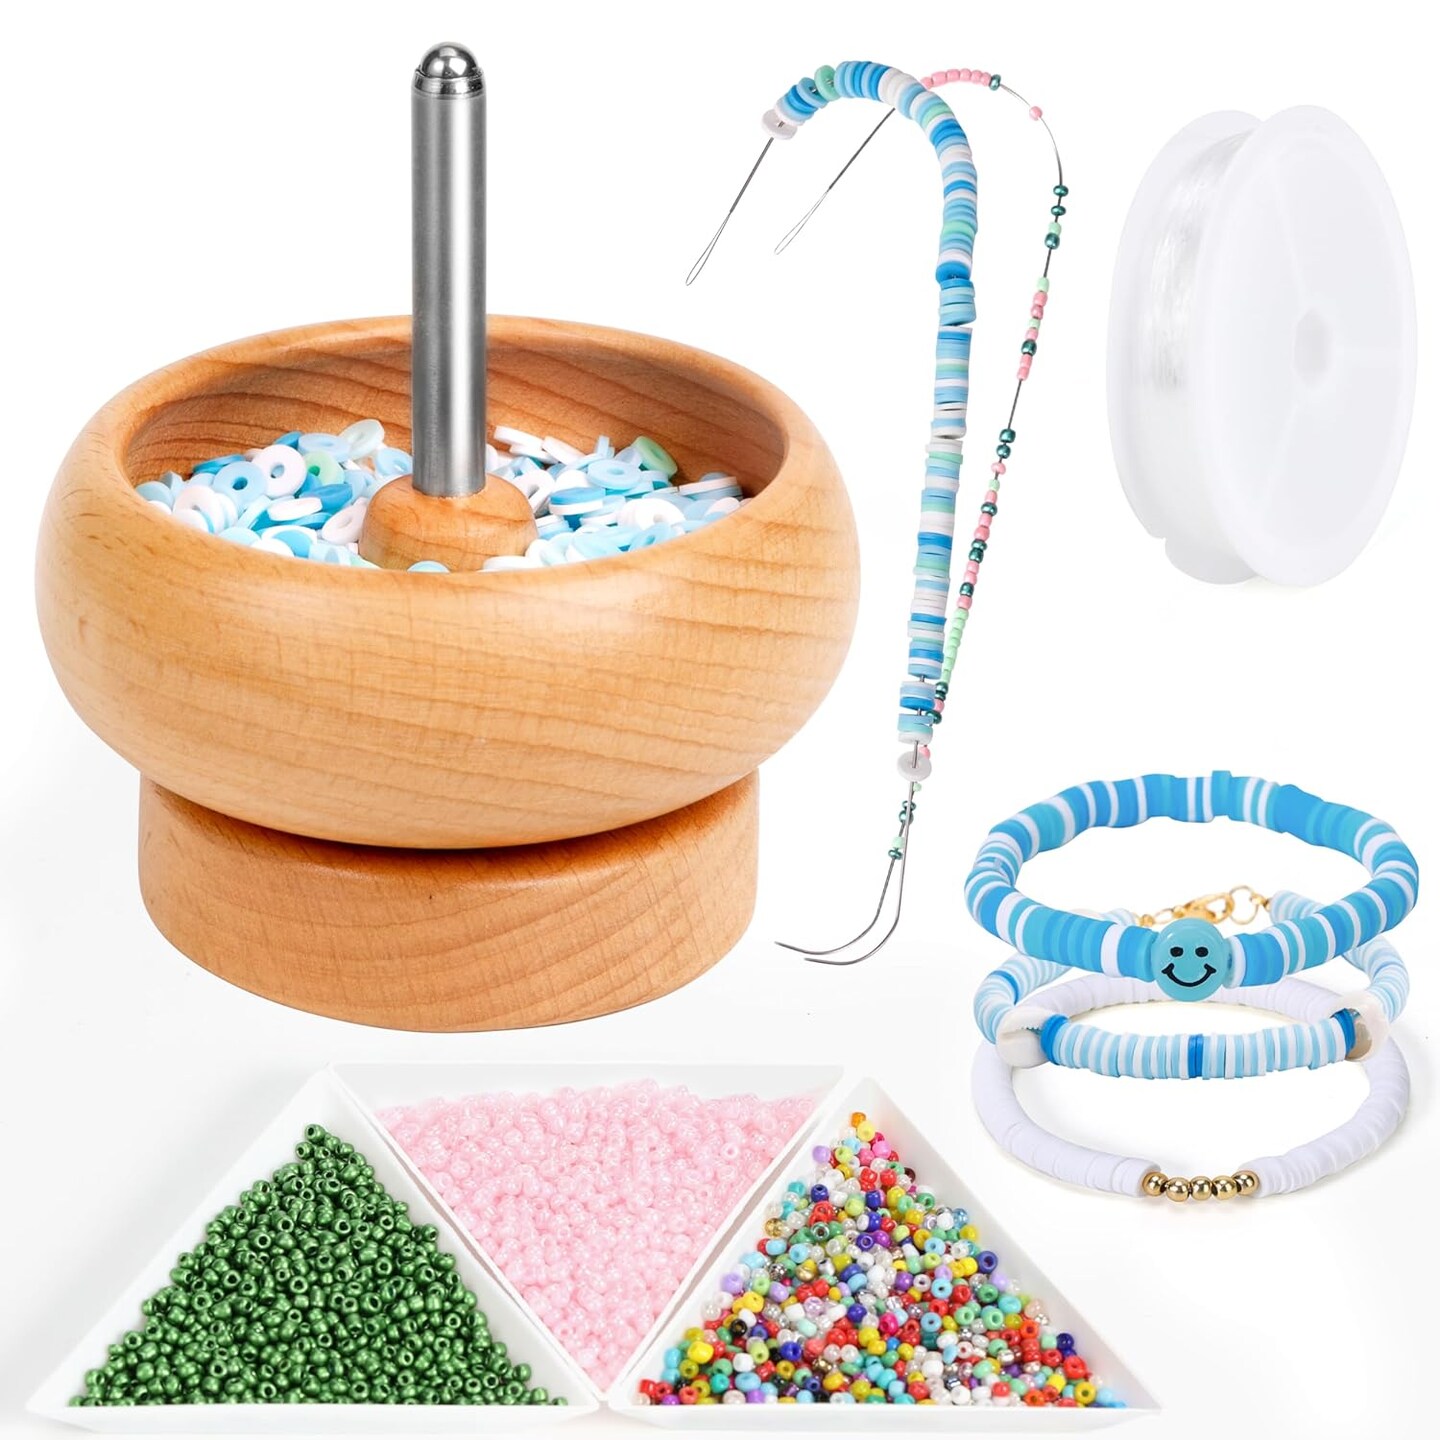 Bead Spinner For Jewelry Making, Bead Spinner Kit With 3000 Pcs Seed Beads, Beading Needles, Beading Tools, Bowl For Waist Chains, Bracelets, Necklaces